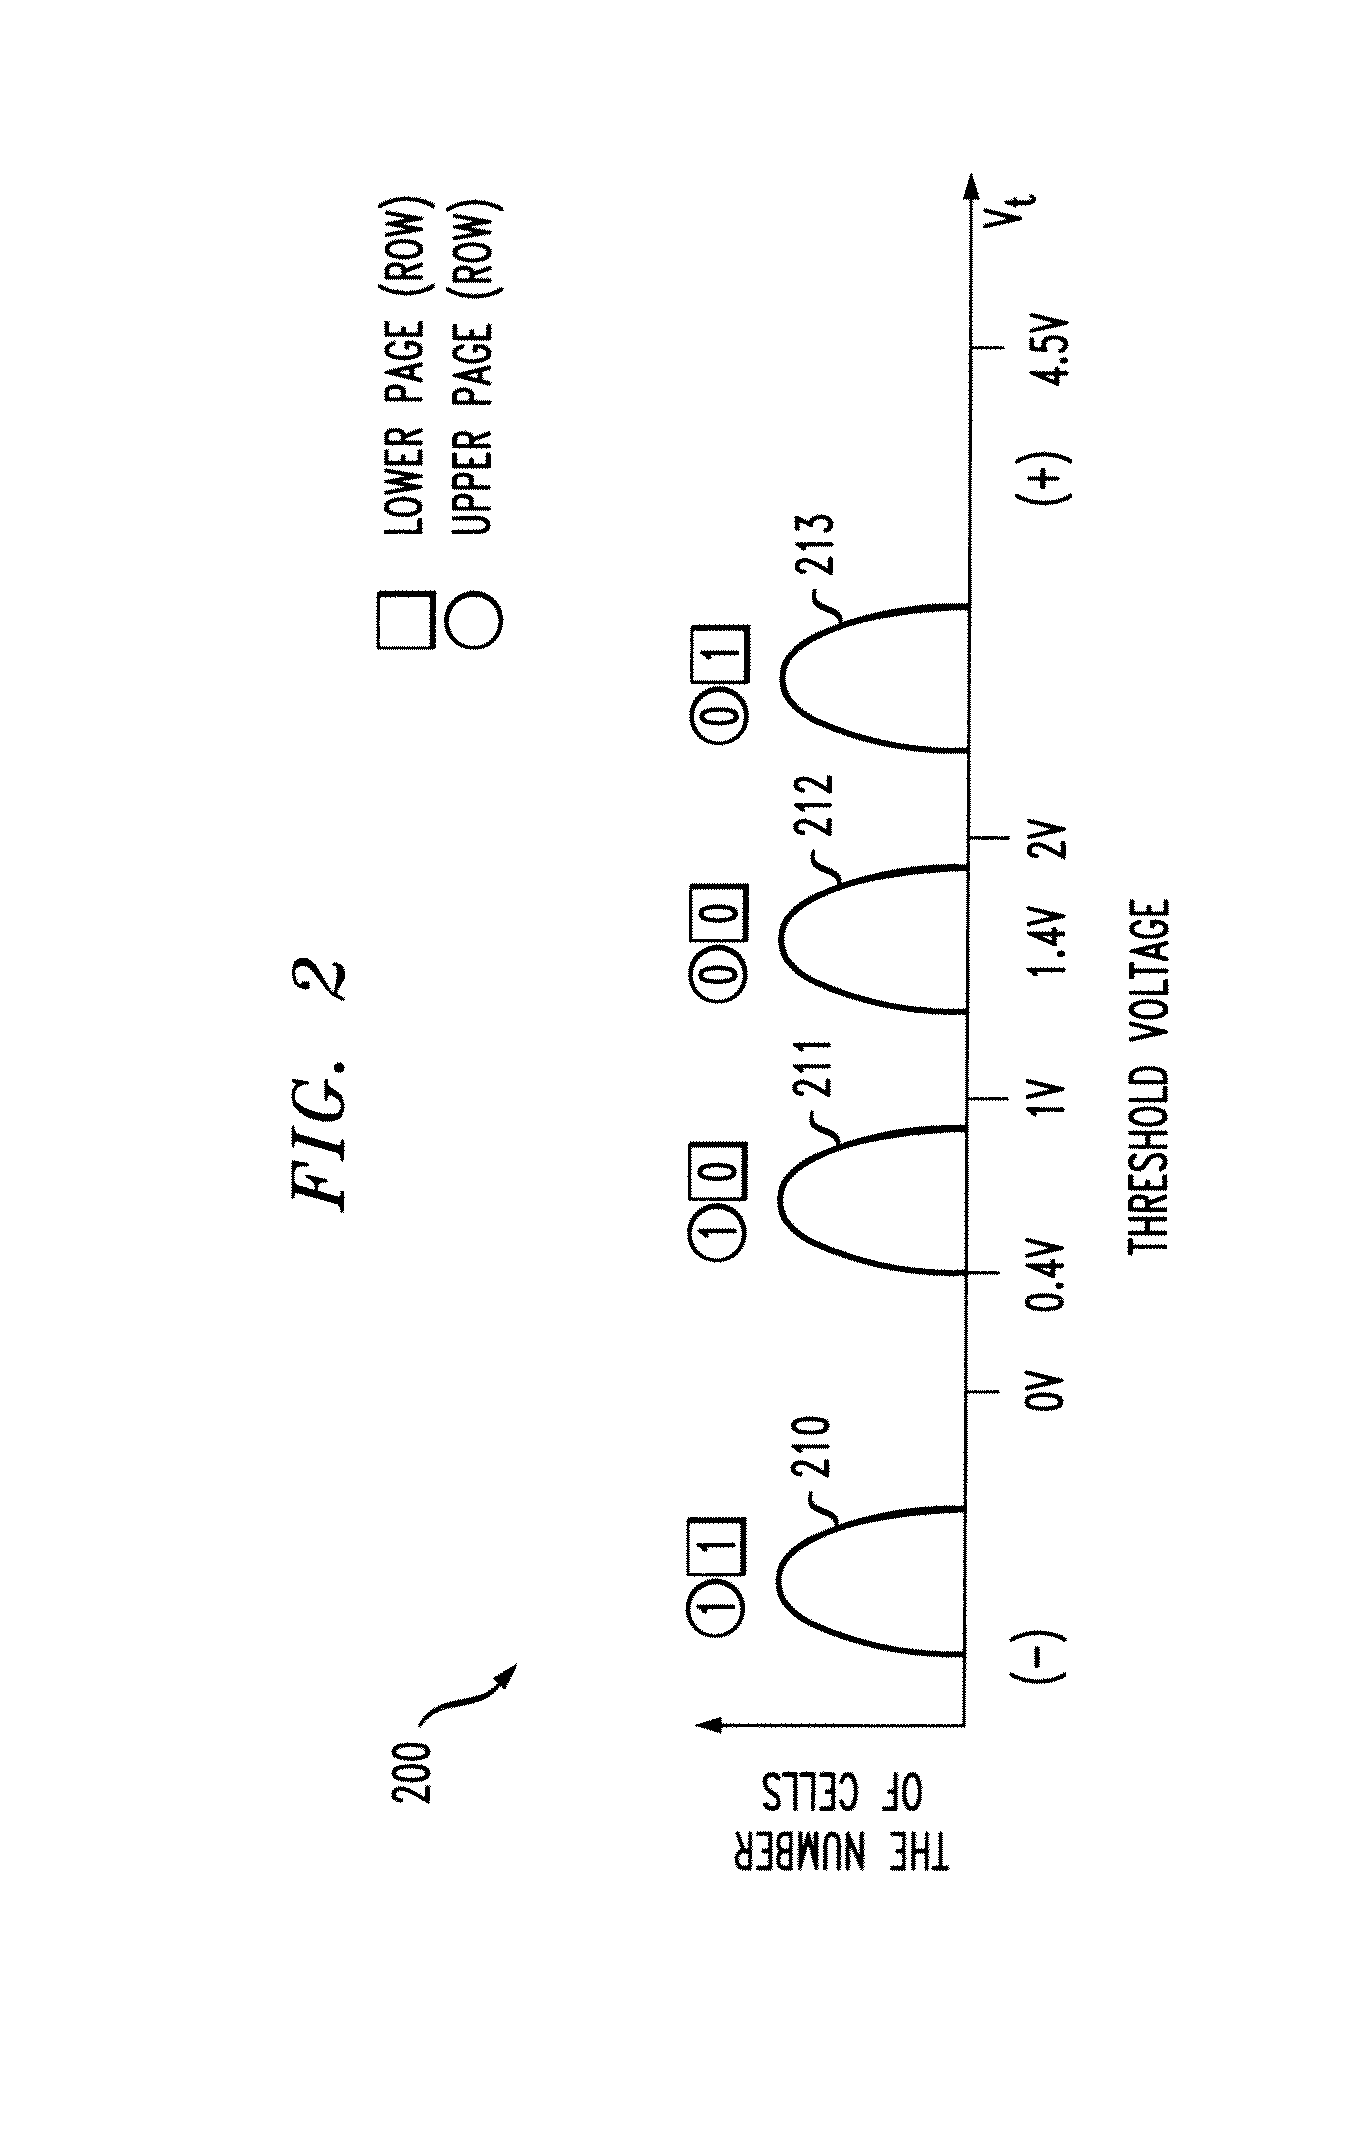 Methods and apparatus for computing soft data or log likelihood ratios for received values in communication or storage systems